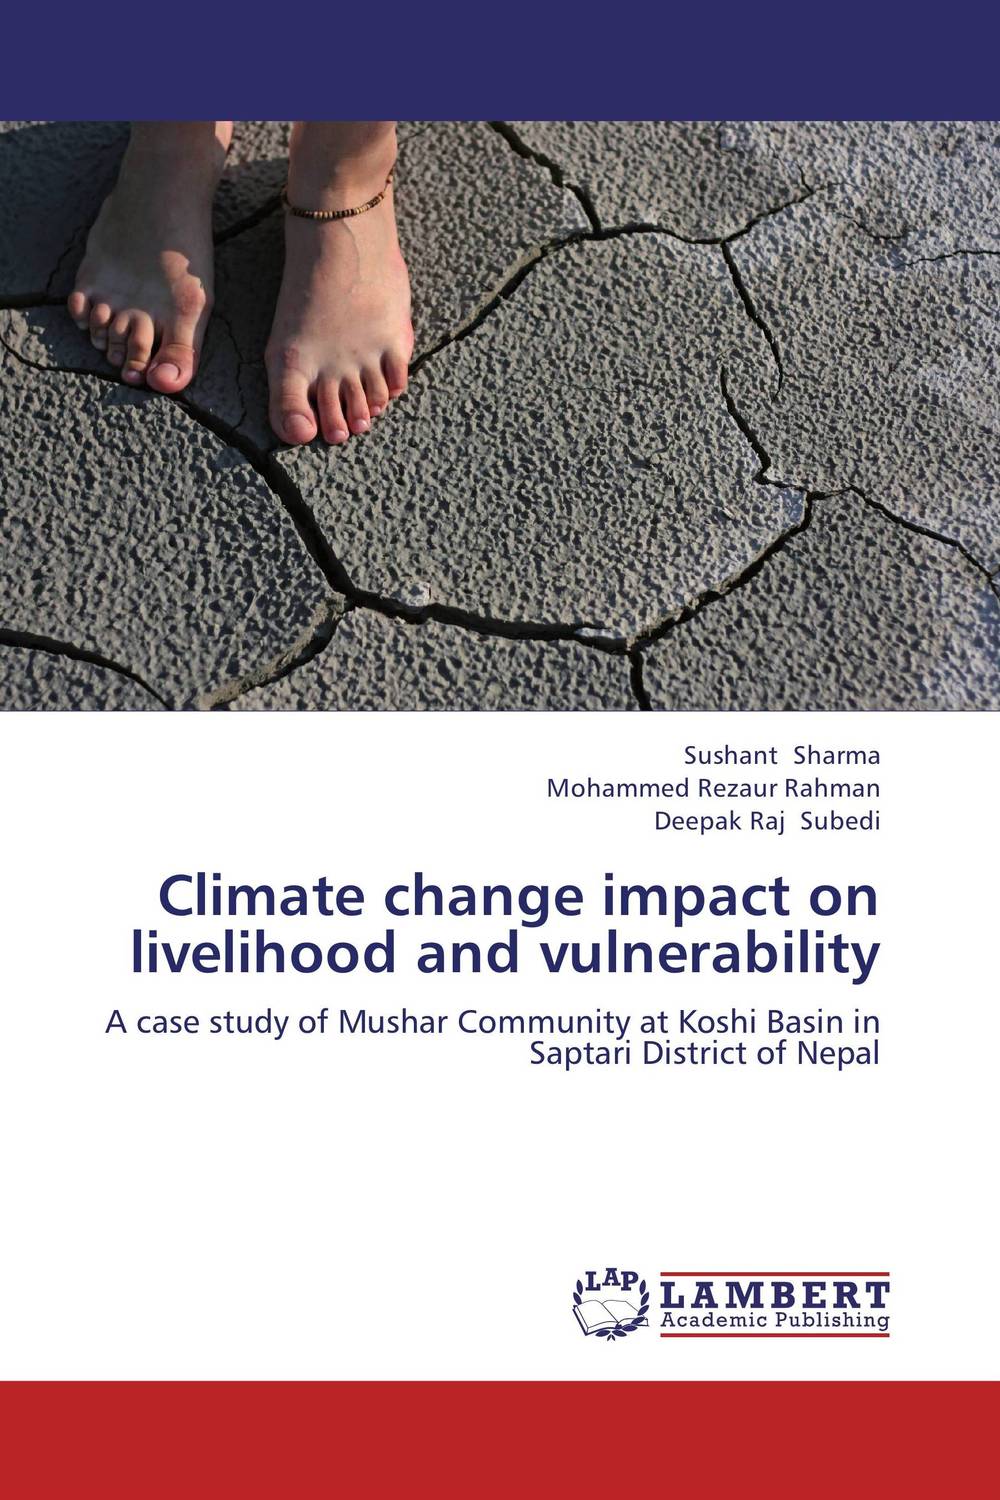 Climate change impact on livelihood and vulnerability